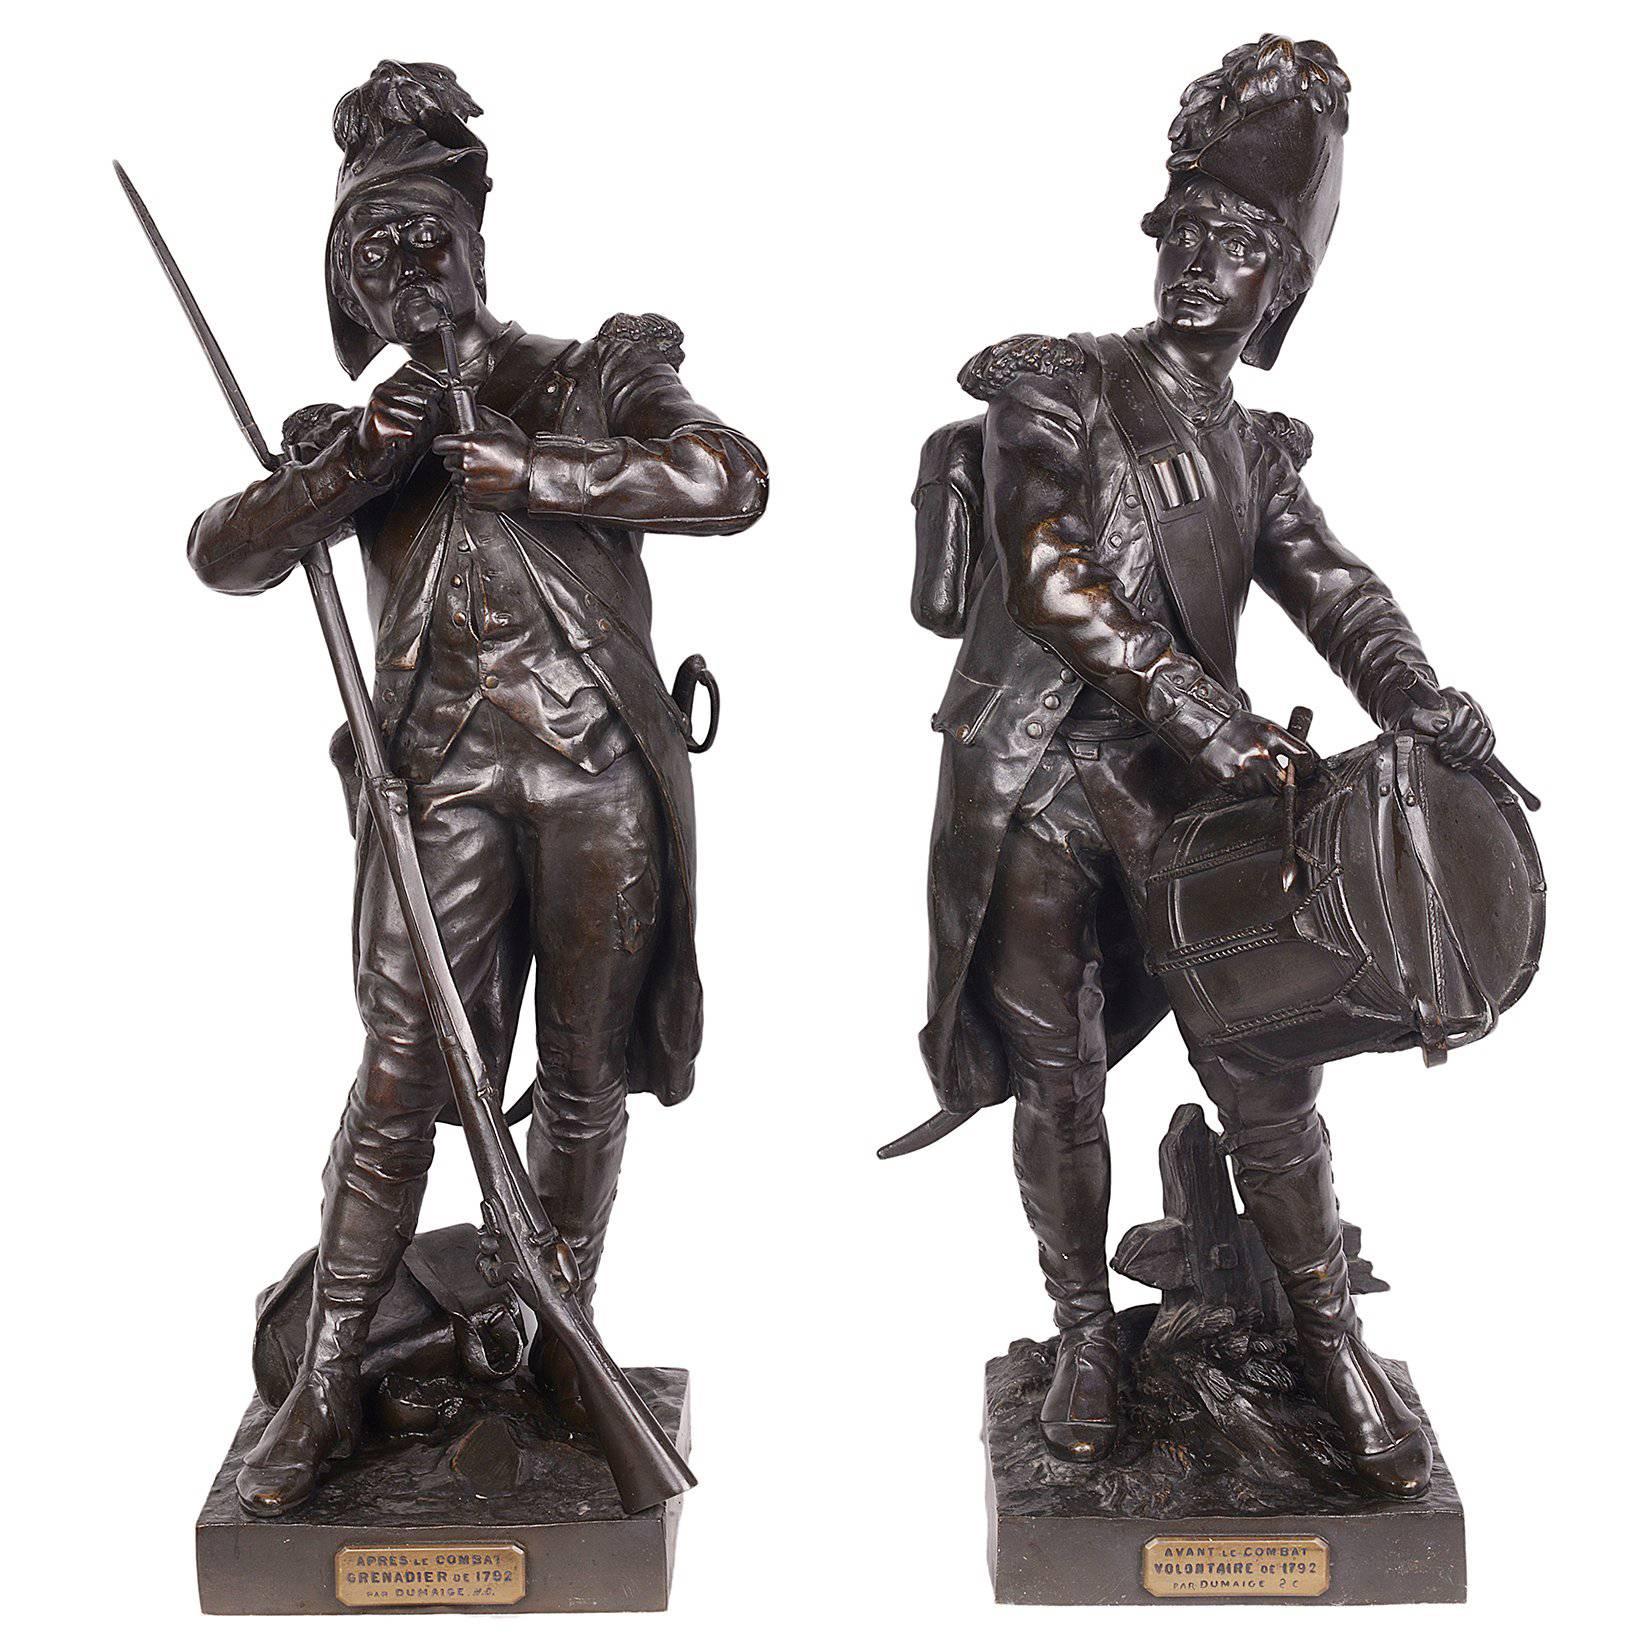 Pair of 19th Century French Bronze Soldiers, by Etienne-Henri Dumaige